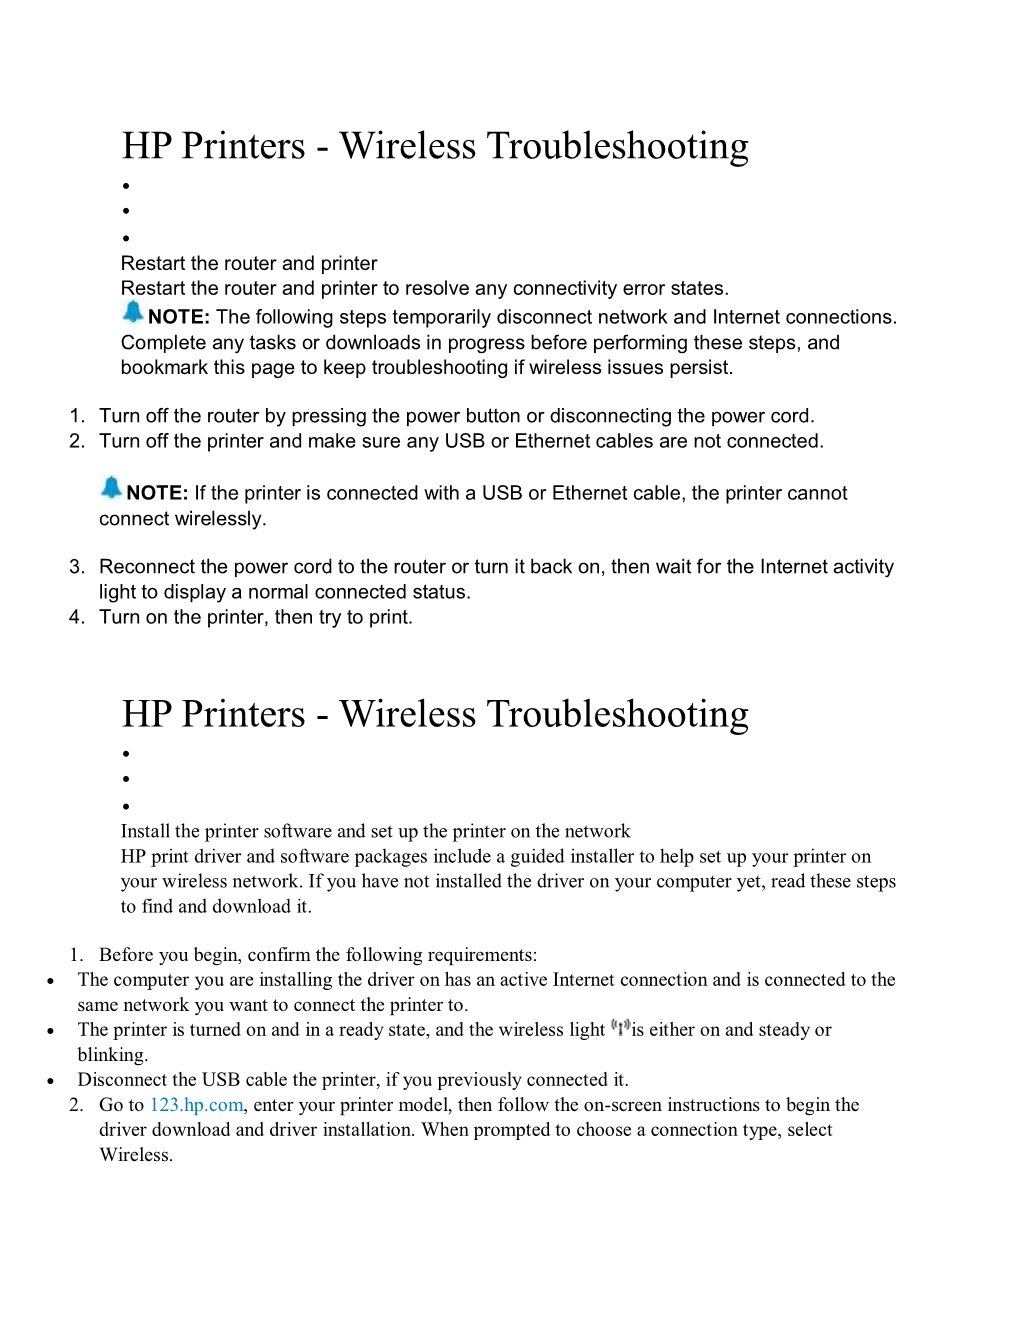 HP Printers - Wireless Troubleshooting    Restart the Router and Printer Restart the Router and Printer to Resolve Any Connectivity Error States